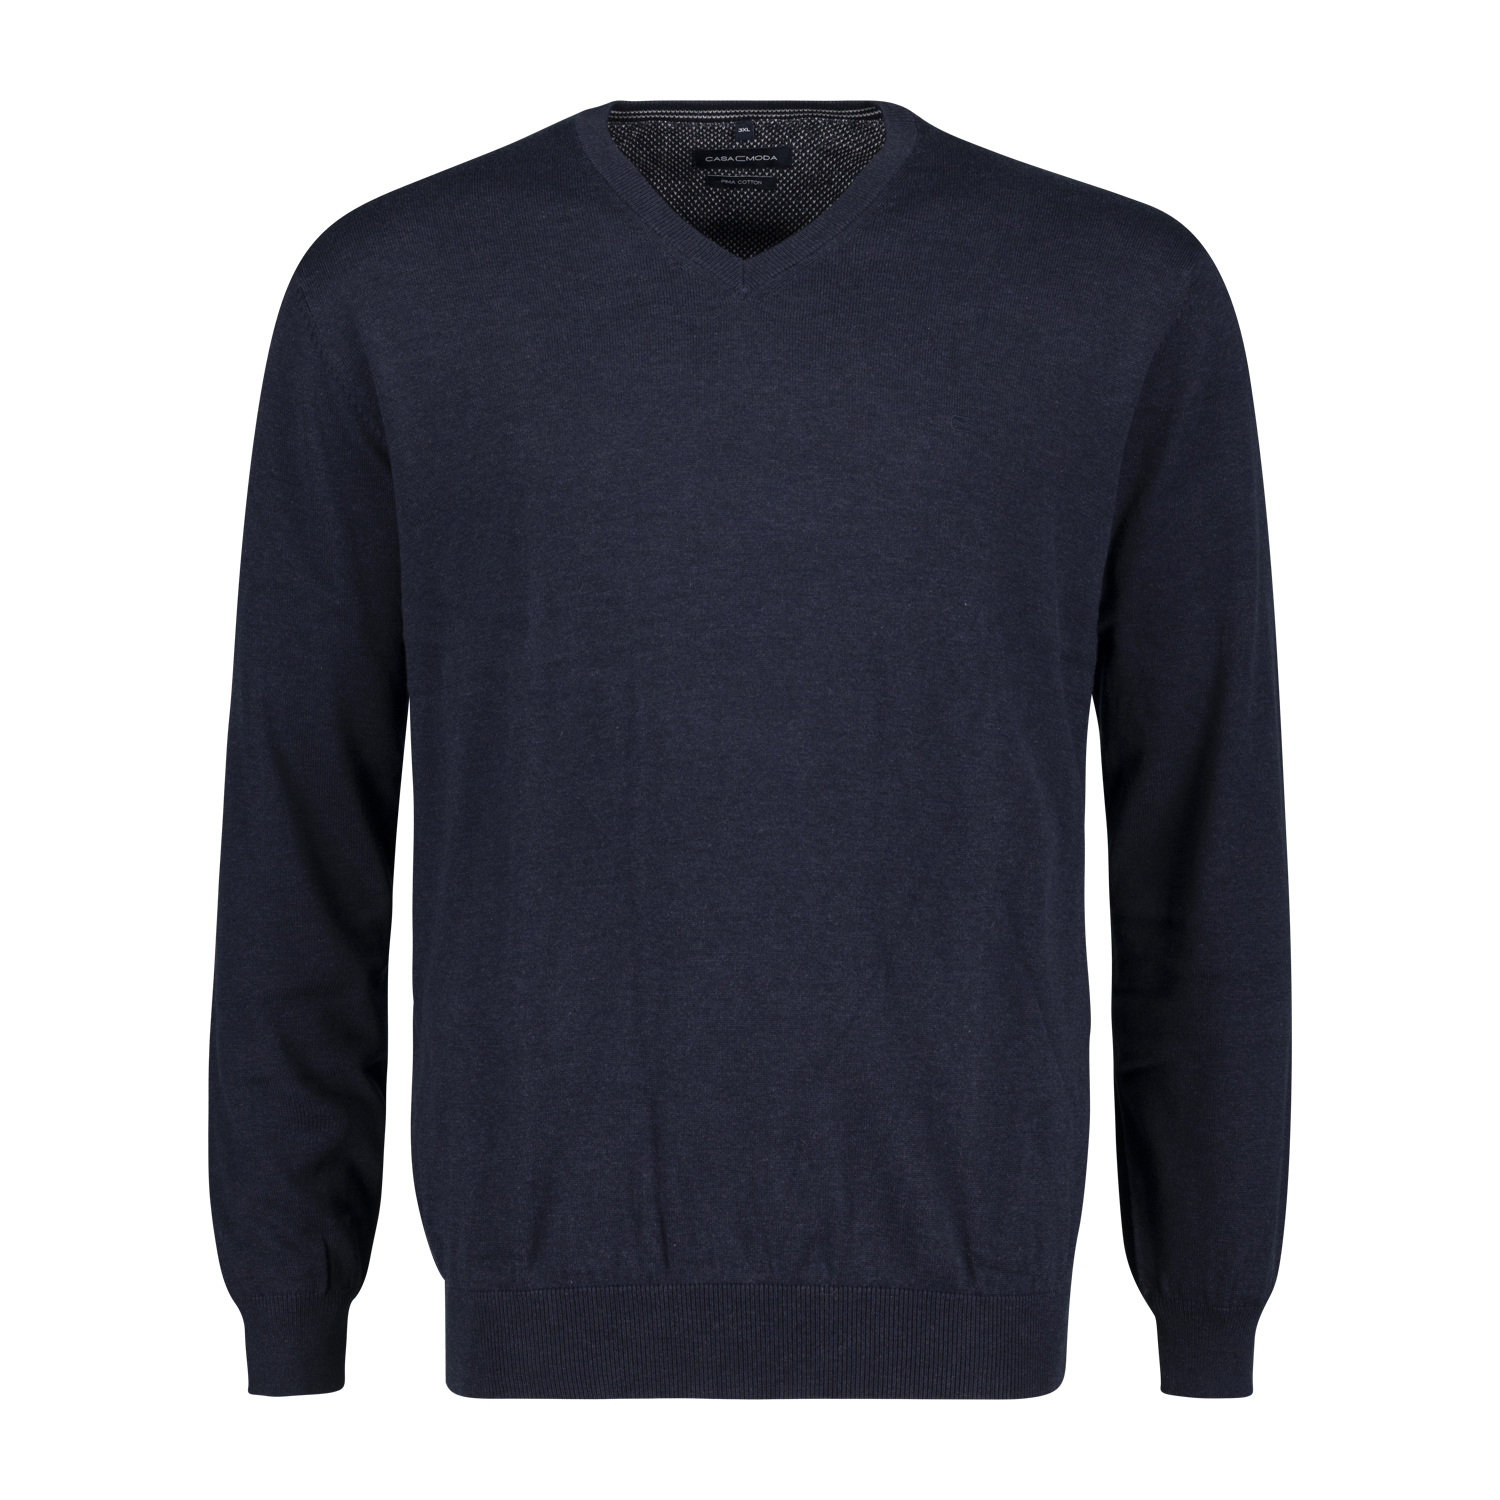 Knitted sweater for men in dark blue by Casamoda in plus sizes up to 6 XL